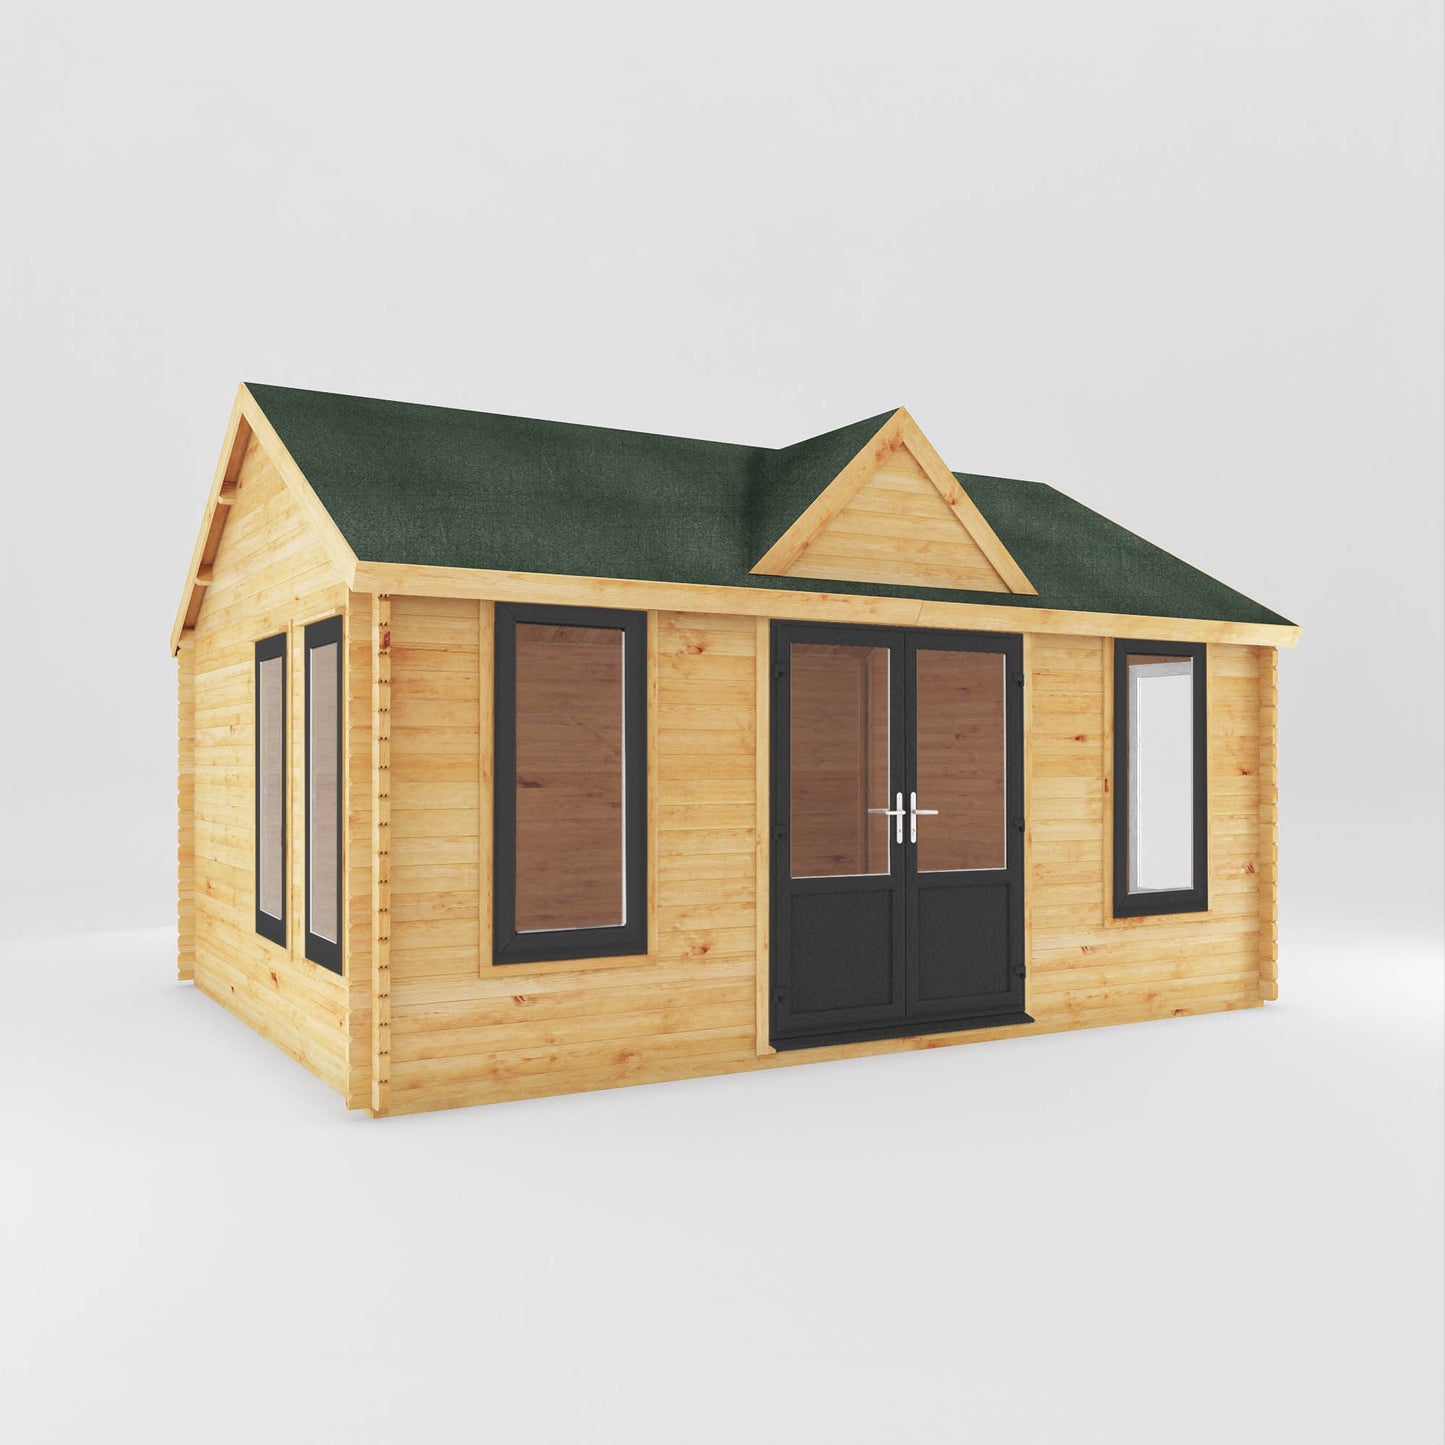 The 5.3m x 4m Grouse Log Cabin with Anthracite UPVC